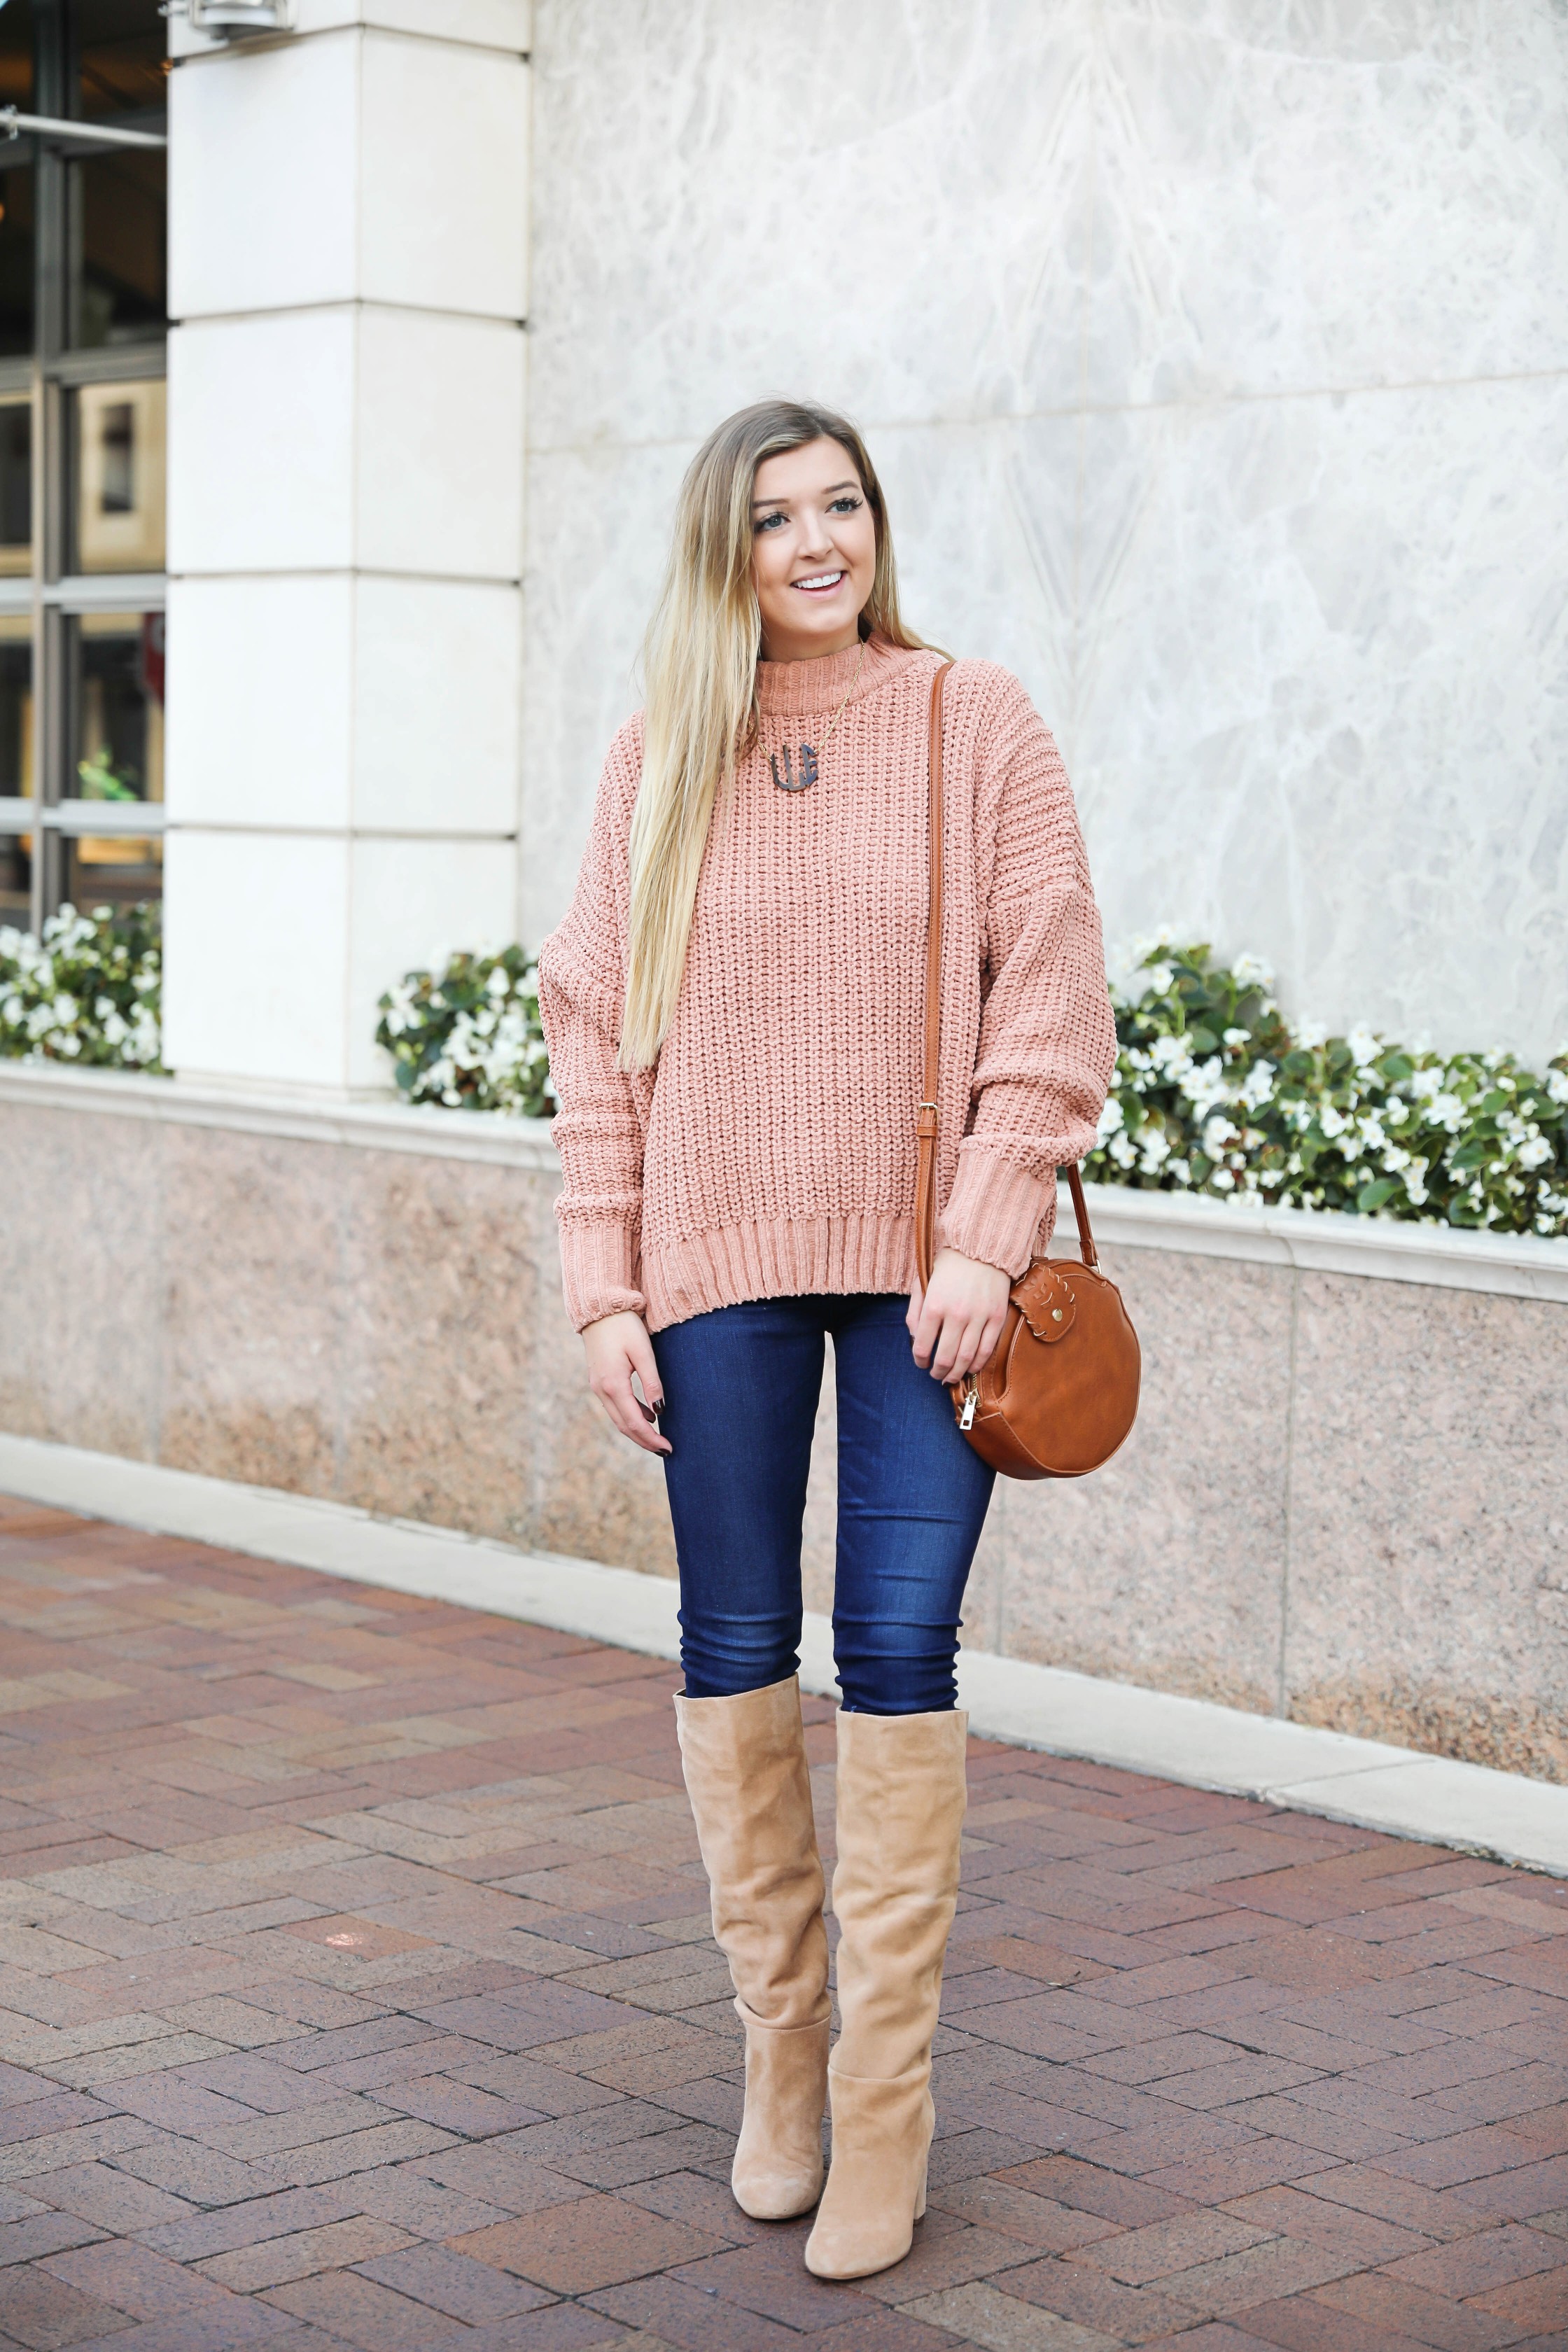 Oversized soft pink sweater! I love a cute inexpensive sweater, especially when it is comfy too! I paired mine with dark jeans and tan knee high boots by Sam Edelman! I also threw on my tortoise shell monogram necklace and faux leather bag! Details on fashion blog daily dose of charm by lauren lindmark